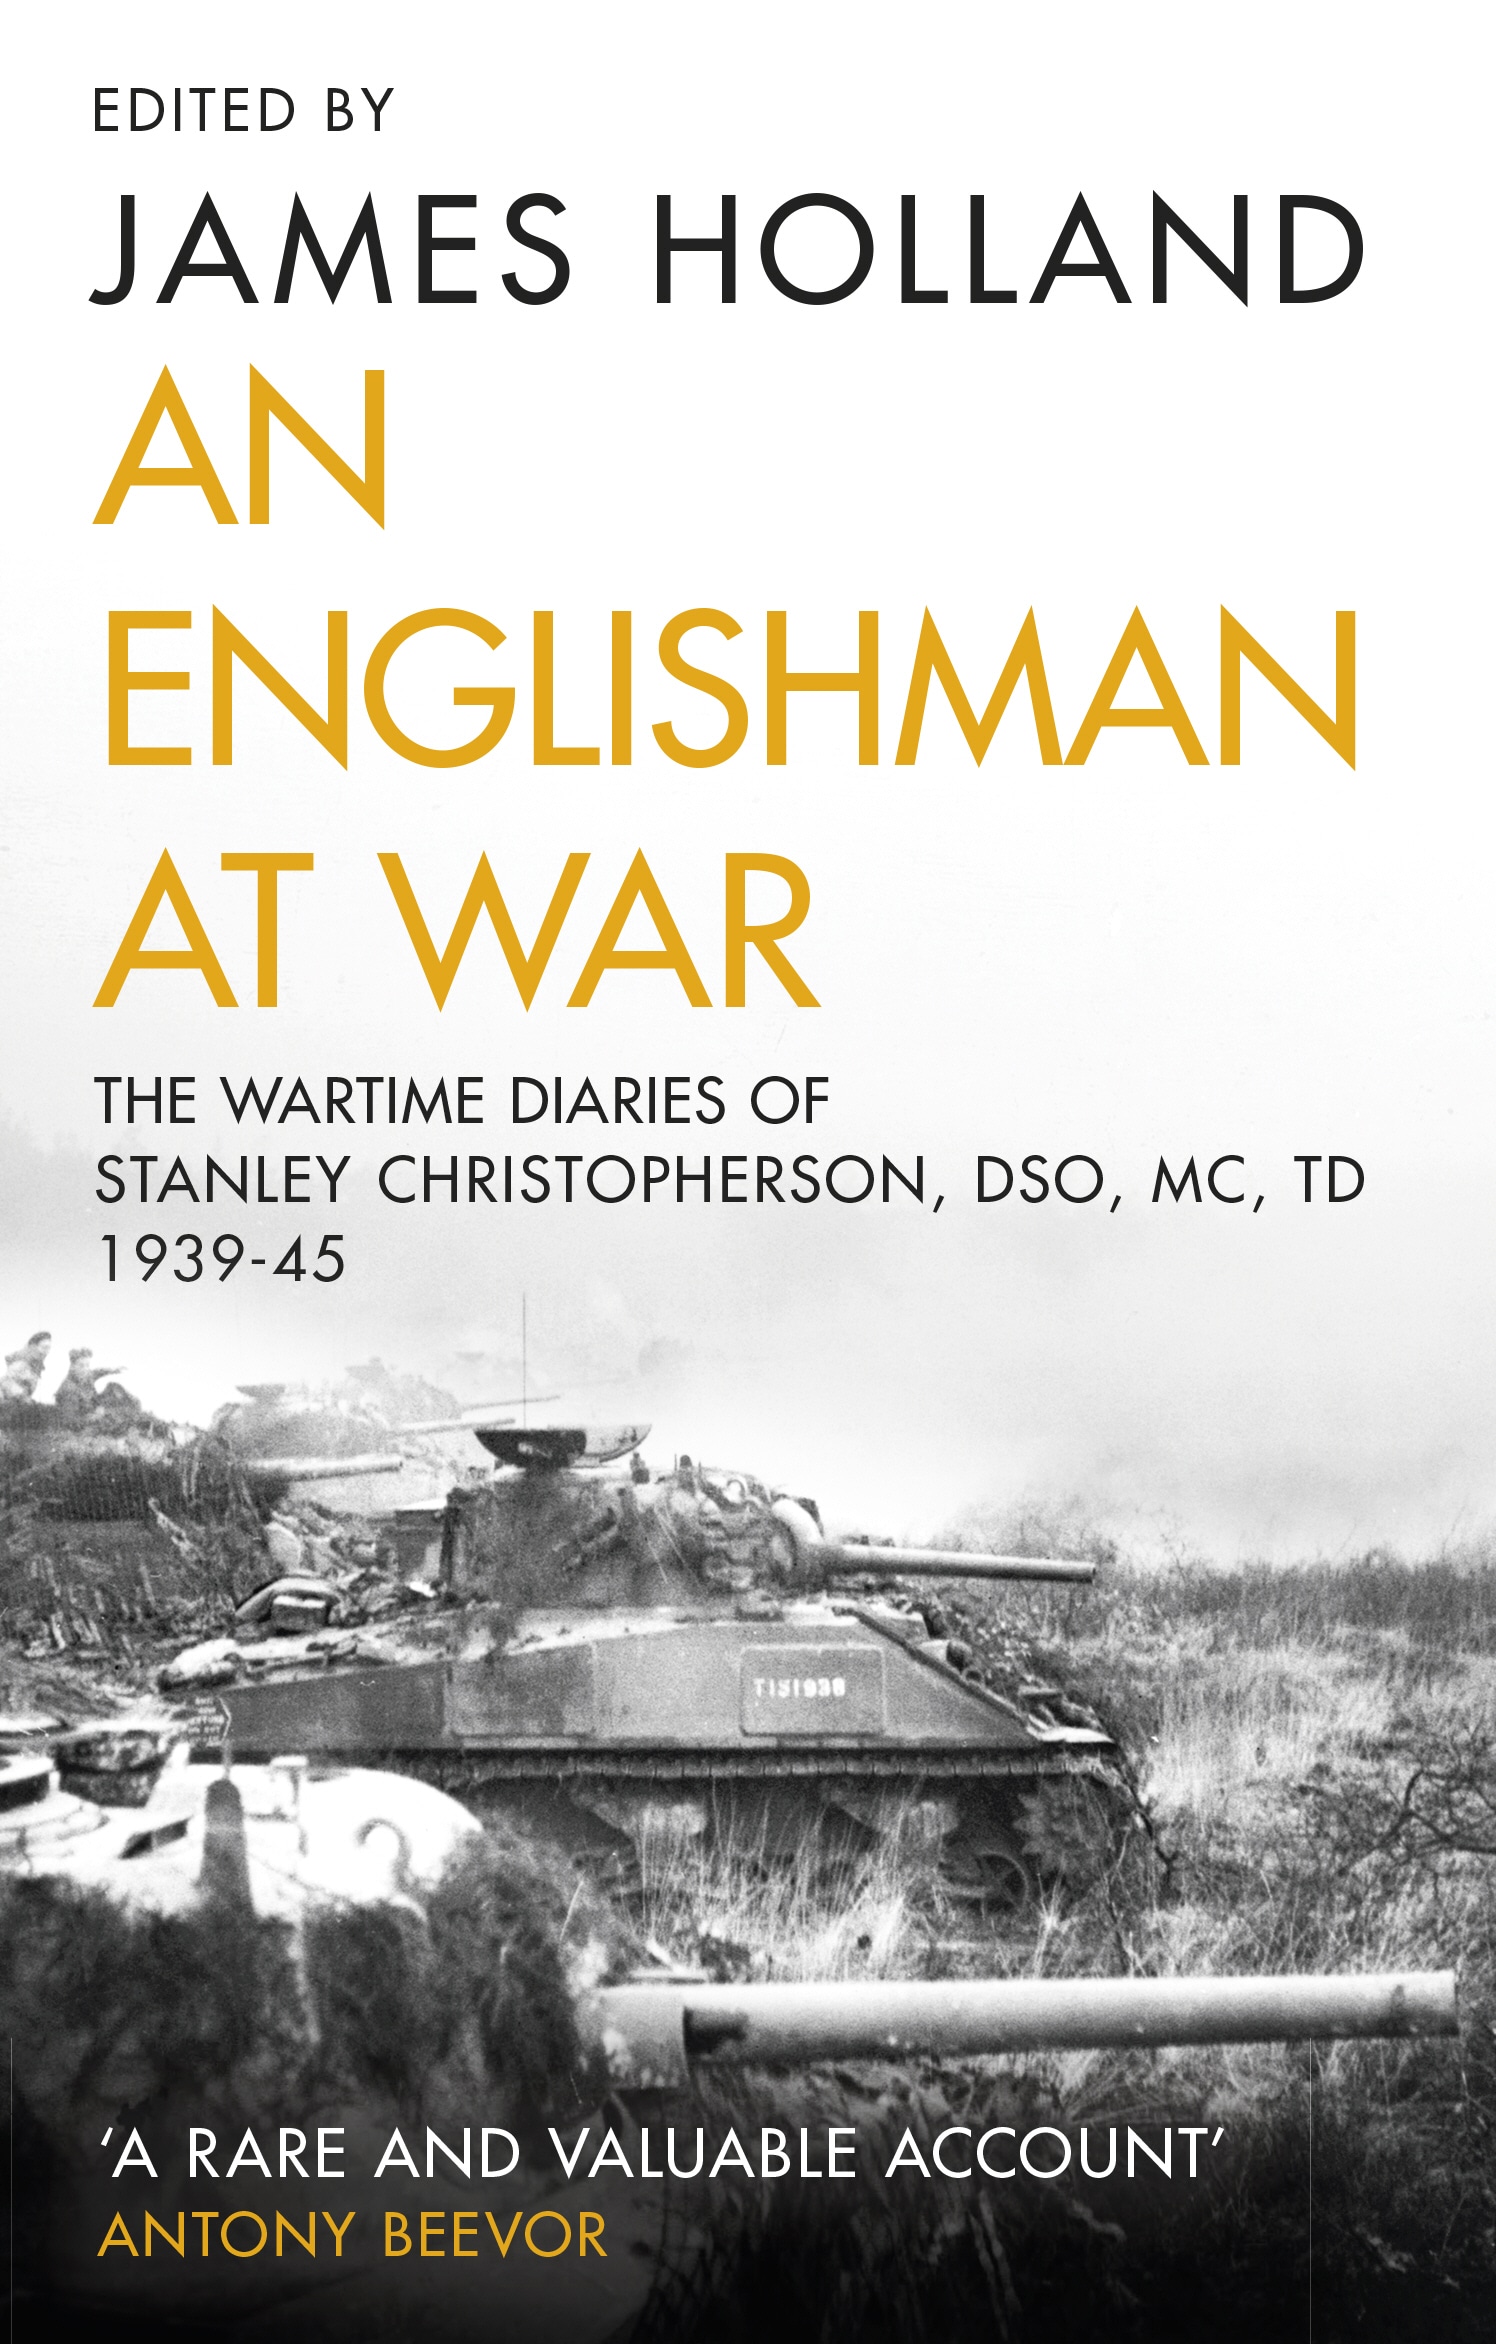 Book “An Englishman at War: The Wartime Diaries of Stanley Christopherson DSO MC & Bar 1939-1945” by Stanley Christopherson, James Holland — November 12, 2020